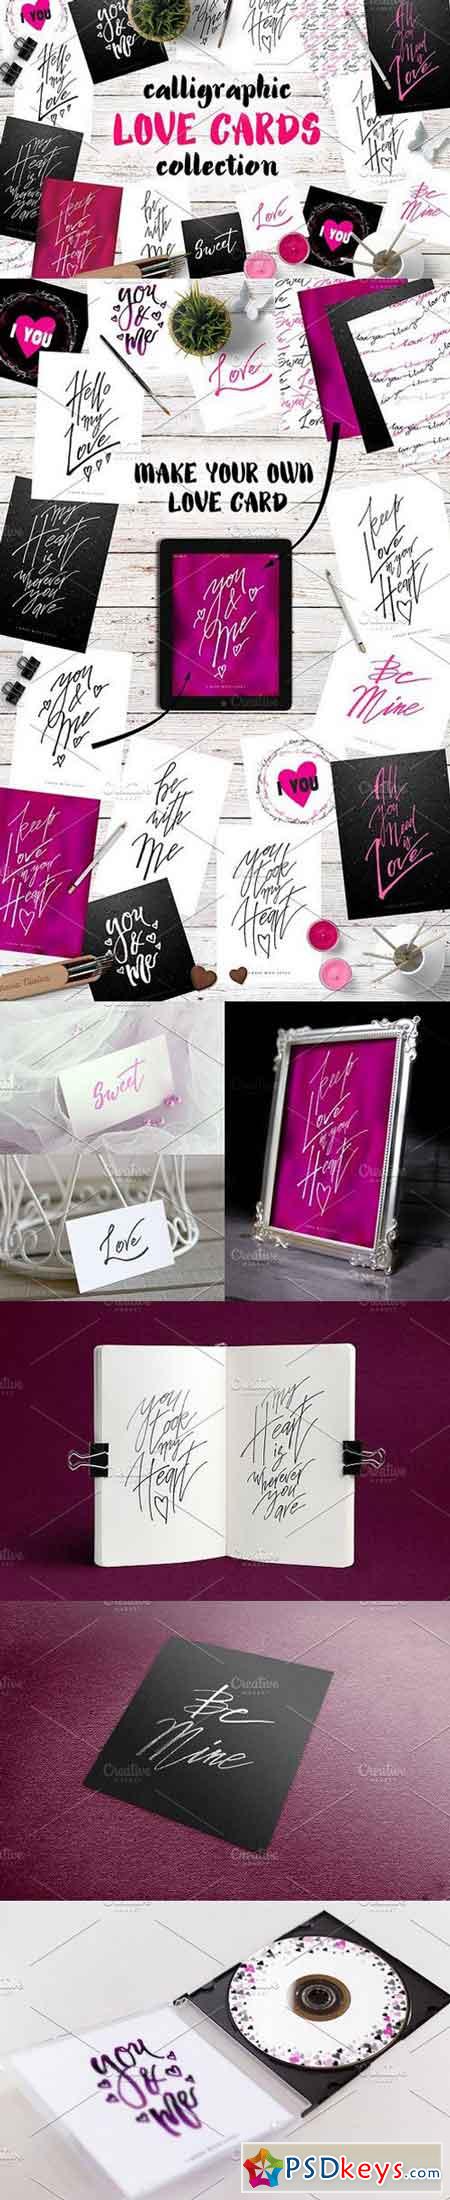 Calligraphy Love Cards 1191751